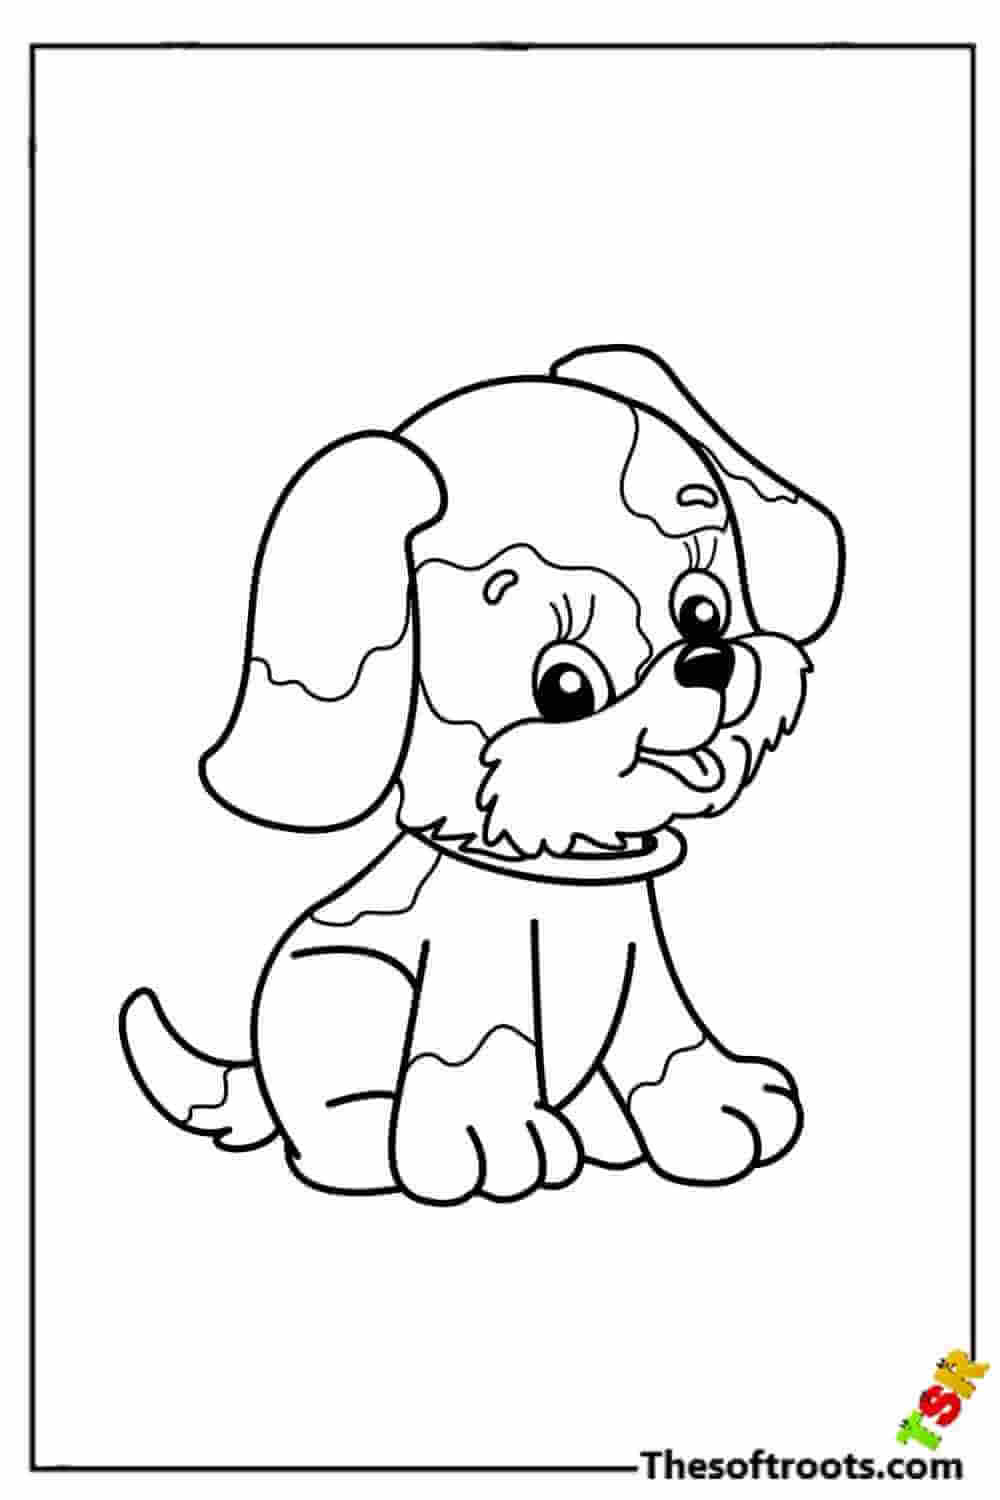 Step By Step Guide On How To Draw A Dog For Kids | Puppy drawing easy, Dog  drawing for kids, Easy drawings